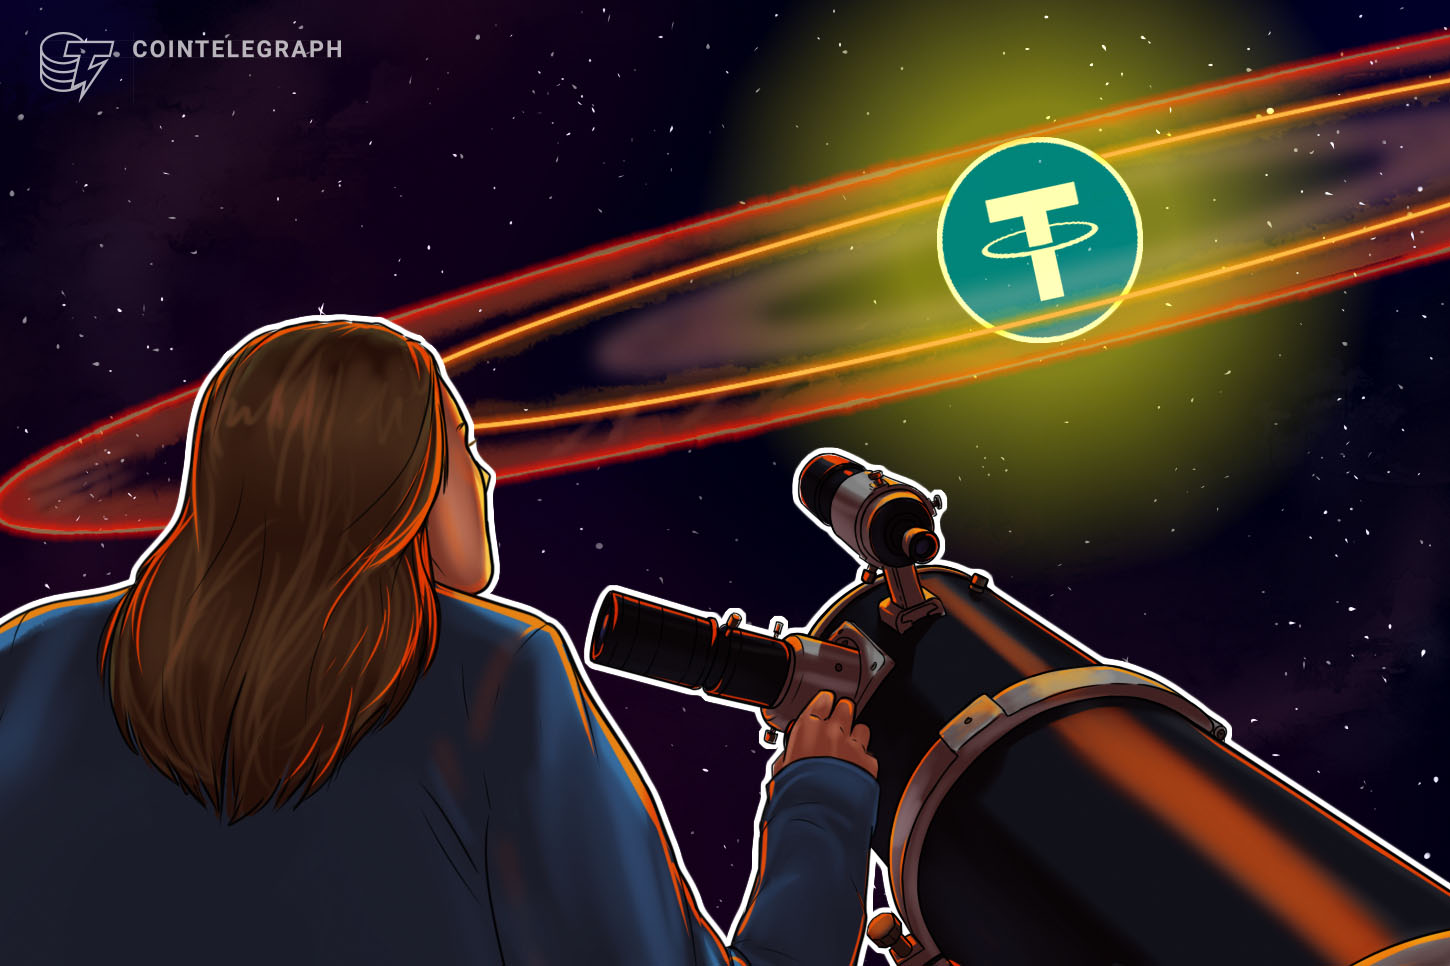 Chill out, Tether gained’t be focused by SEC, says Bitfinex CTO